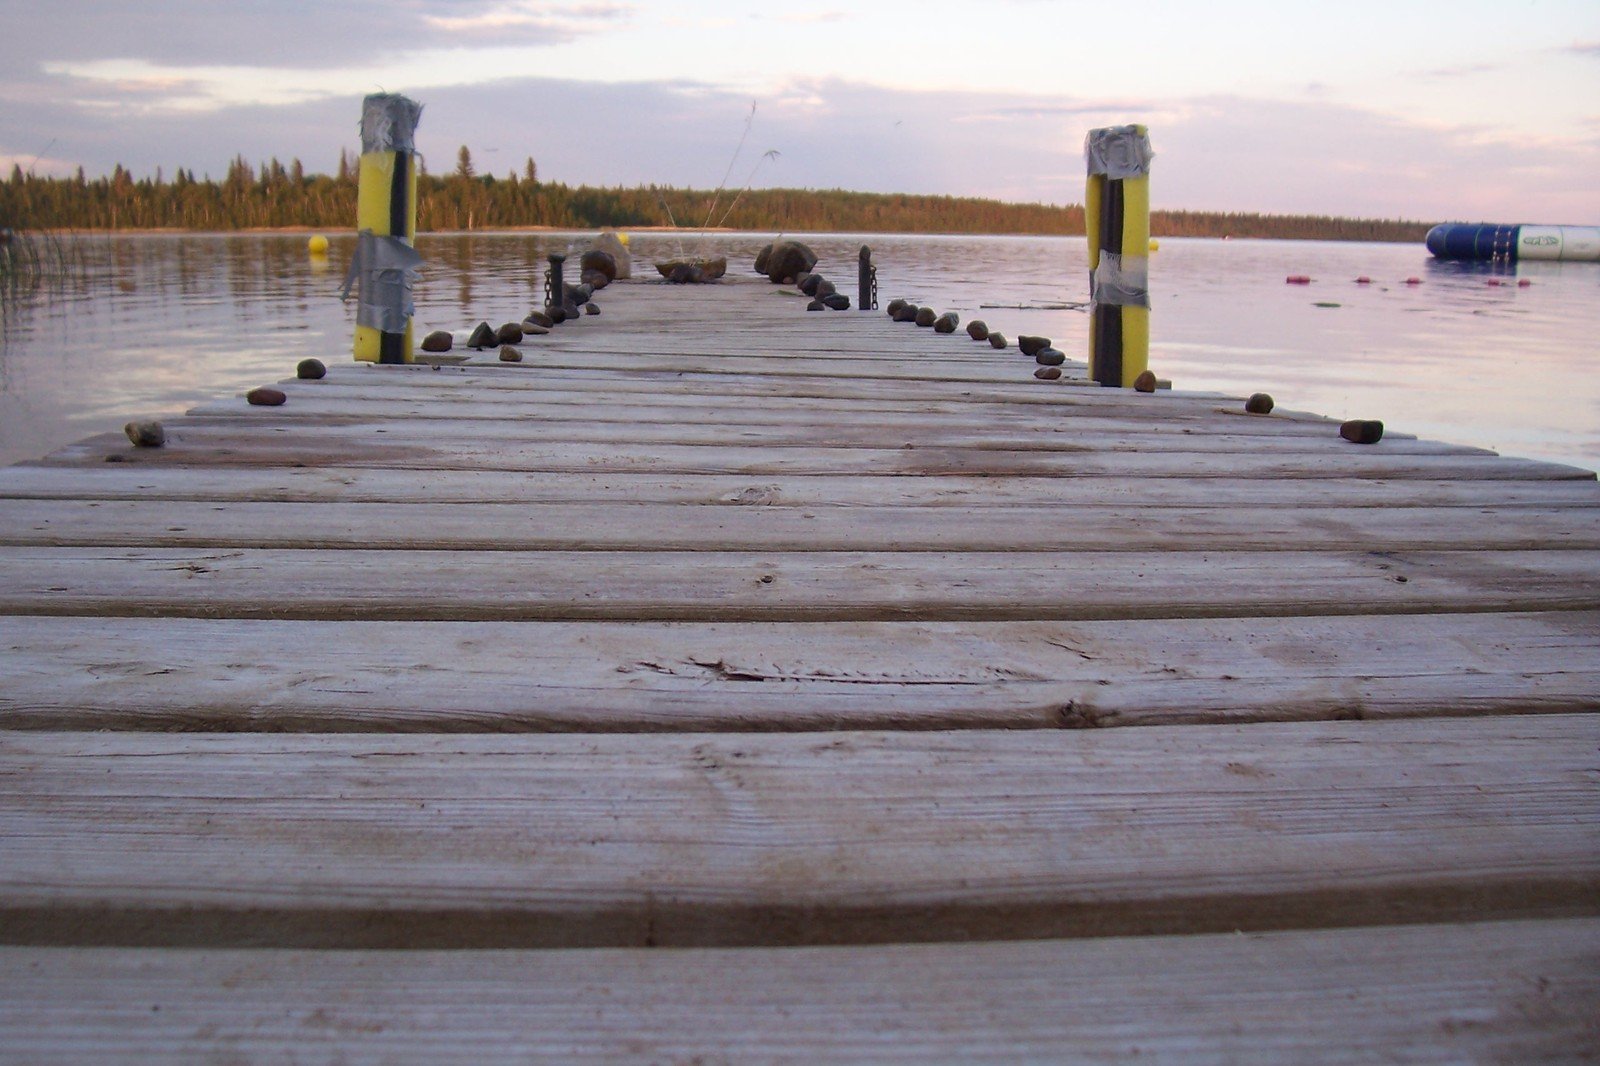 a wooden pier over a body of water